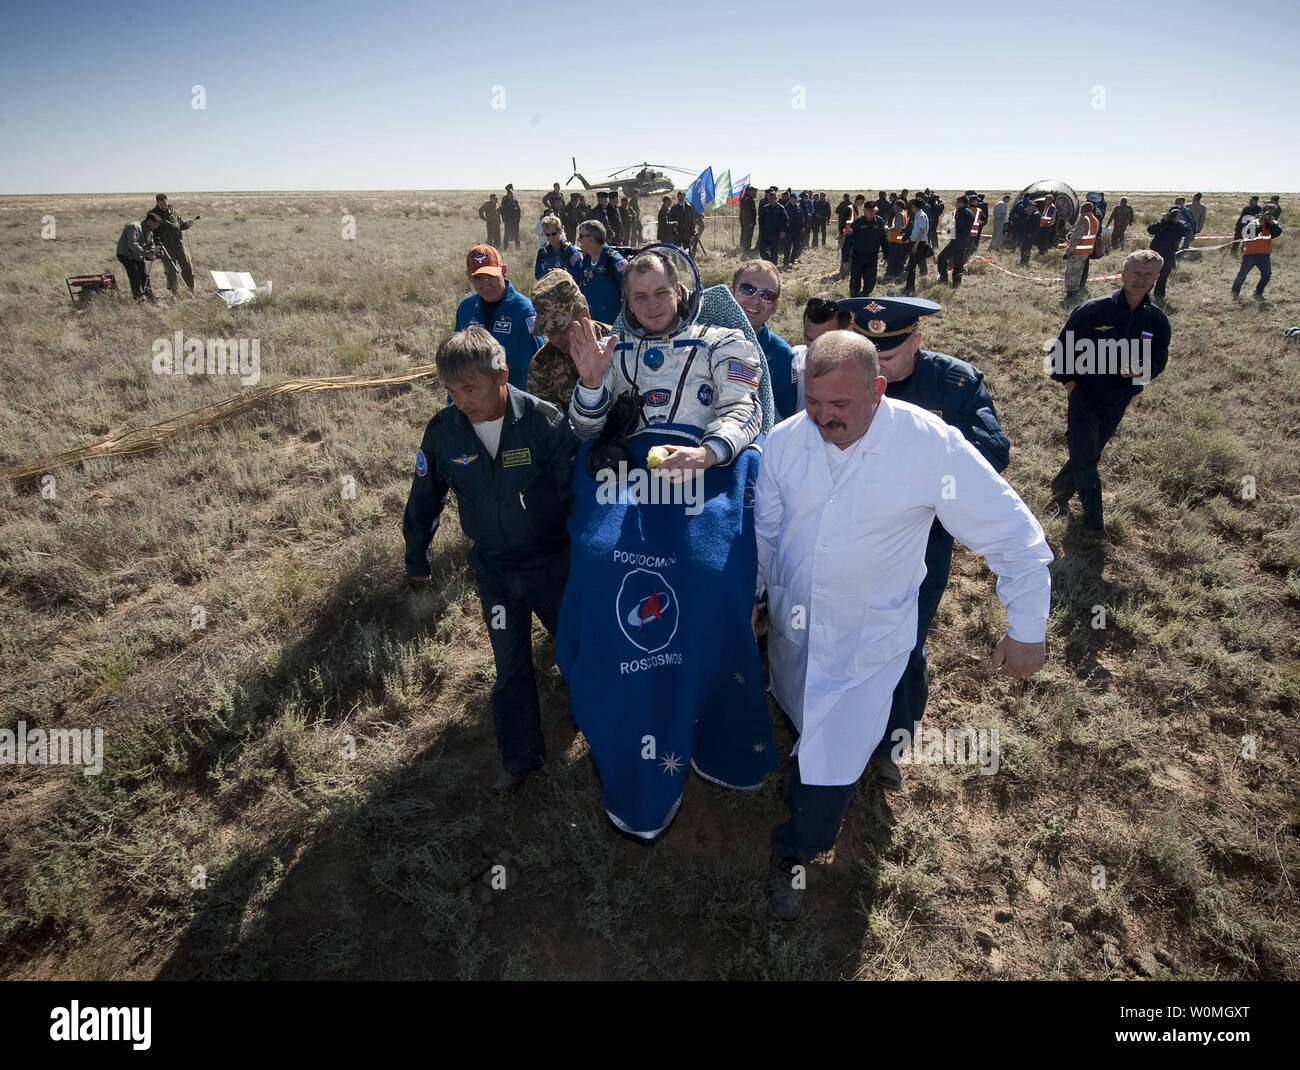 Expedition 23 Flight Engineer T.J. Creamer is carried in a chair to the medical tent just minutes after he and fellow crew members Soichi Noguchi and Commander Oleg Kotov landed in their Soyuz TMA-17 capsule near the town of Zhezkazgan, Kazakhstan on June 2, 2010. NASA Astronaut Creamer, Russian Cosmonaut Kotov and Japanese Astronaut Noguchi are returning from six months onboard the International Space Station where they served as members of the Expedition 22 and 23 crews.  UPI//Bill Ingalls/NASA Stock Photo